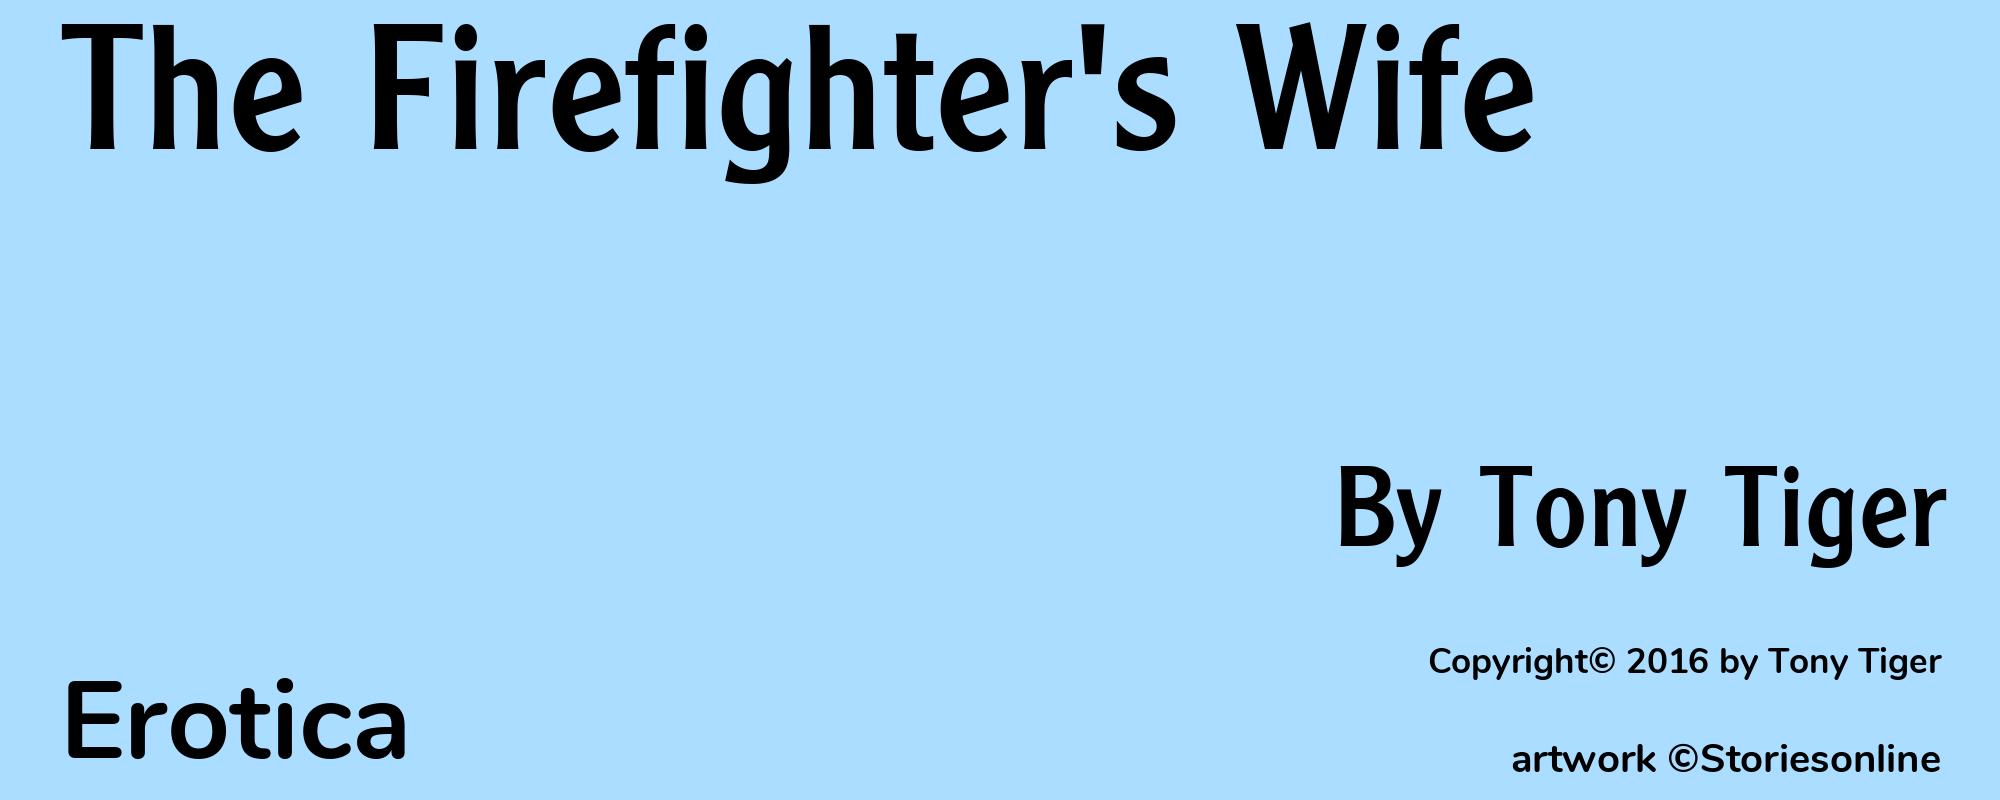 The Firefighter's Wife - Cover